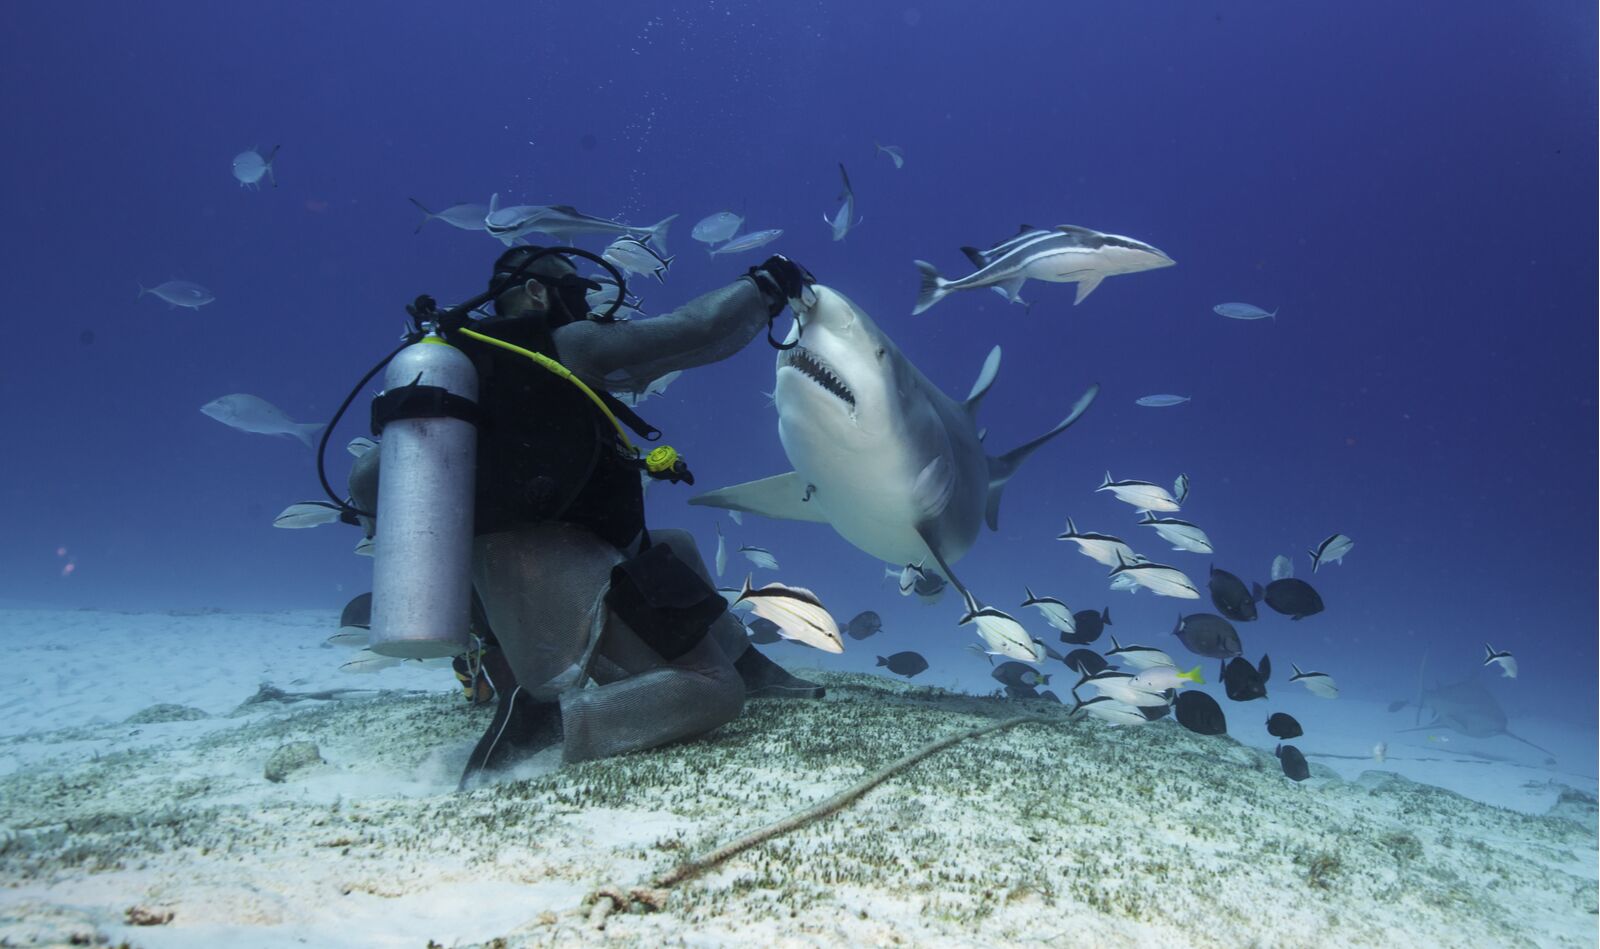 Feeding wild animals has been known to increase encounters between humans and sharks 